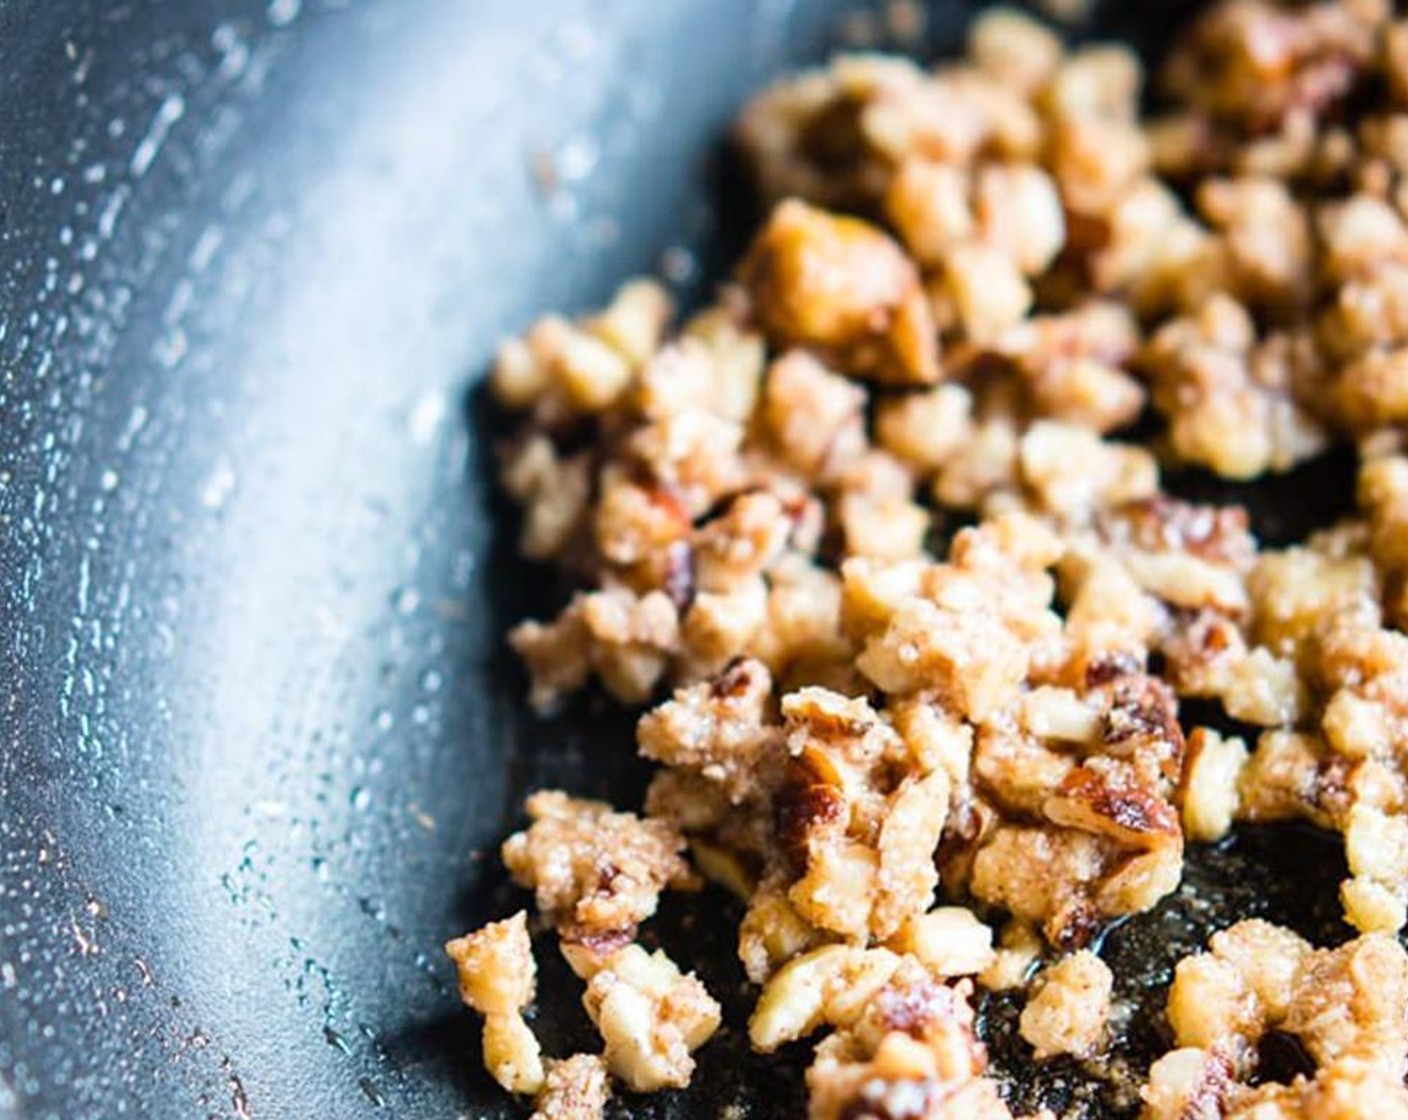 step 1 In a skillet or pan, lightly heat the Hazelnuts (1/2 cup), Walnut (1/2 cup), Almond Meal (1/2 cup), Coconut Oil (1 1/2 Tbsp), and Salt (1/8 tsp) until lightly coated and toasted.